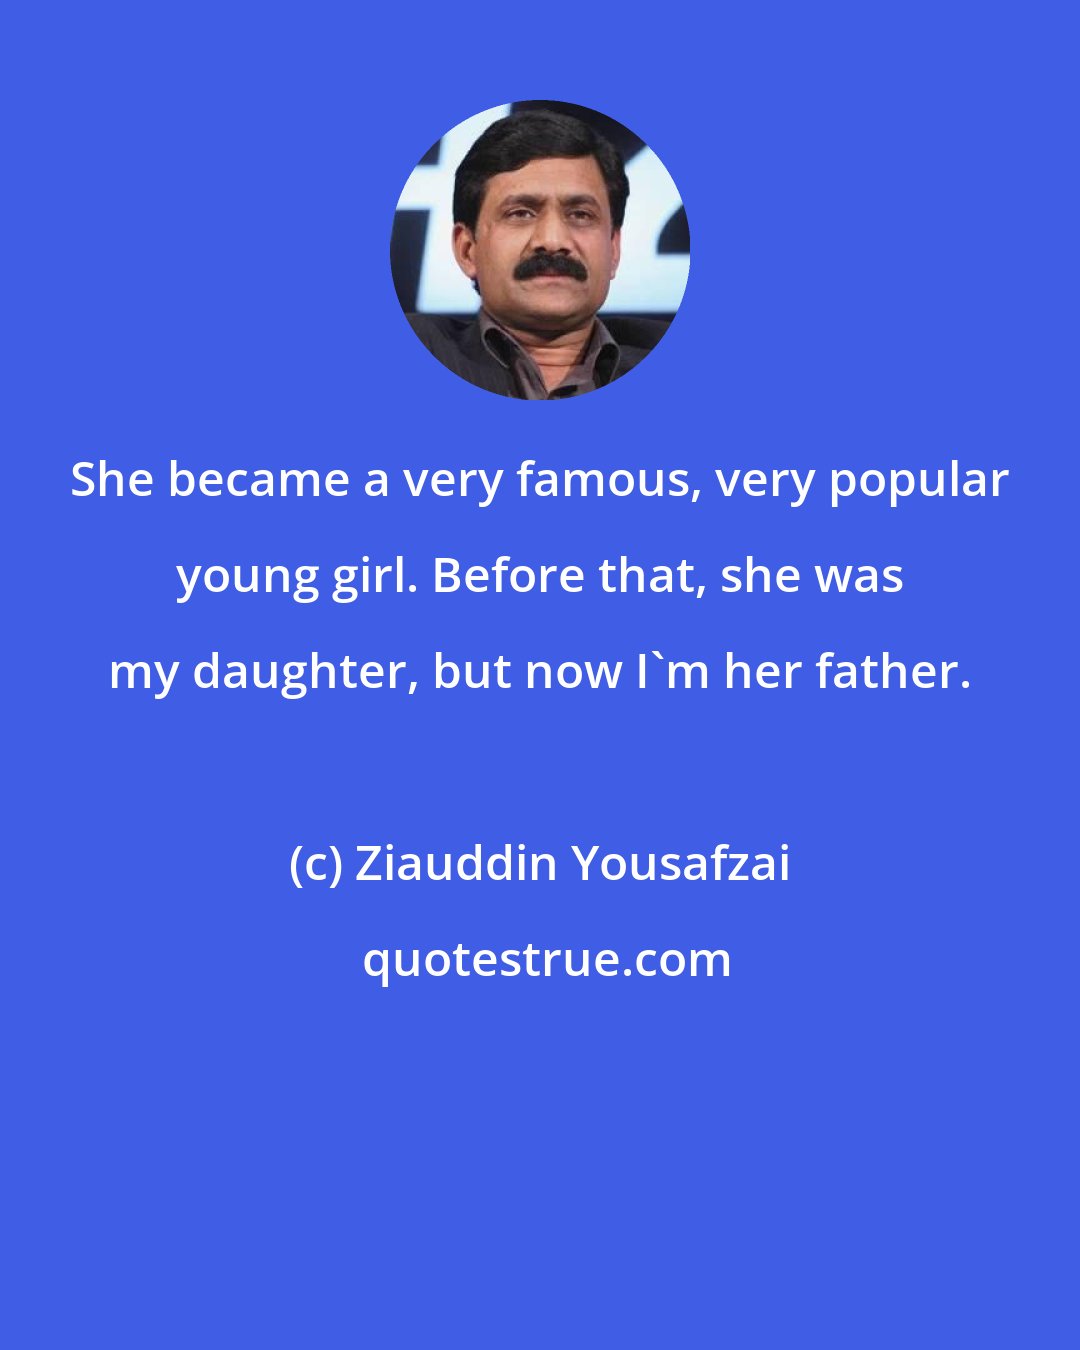 Ziauddin Yousafzai: She became a very famous, very popular young girl. Before that, she was my daughter, but now I'm her father.